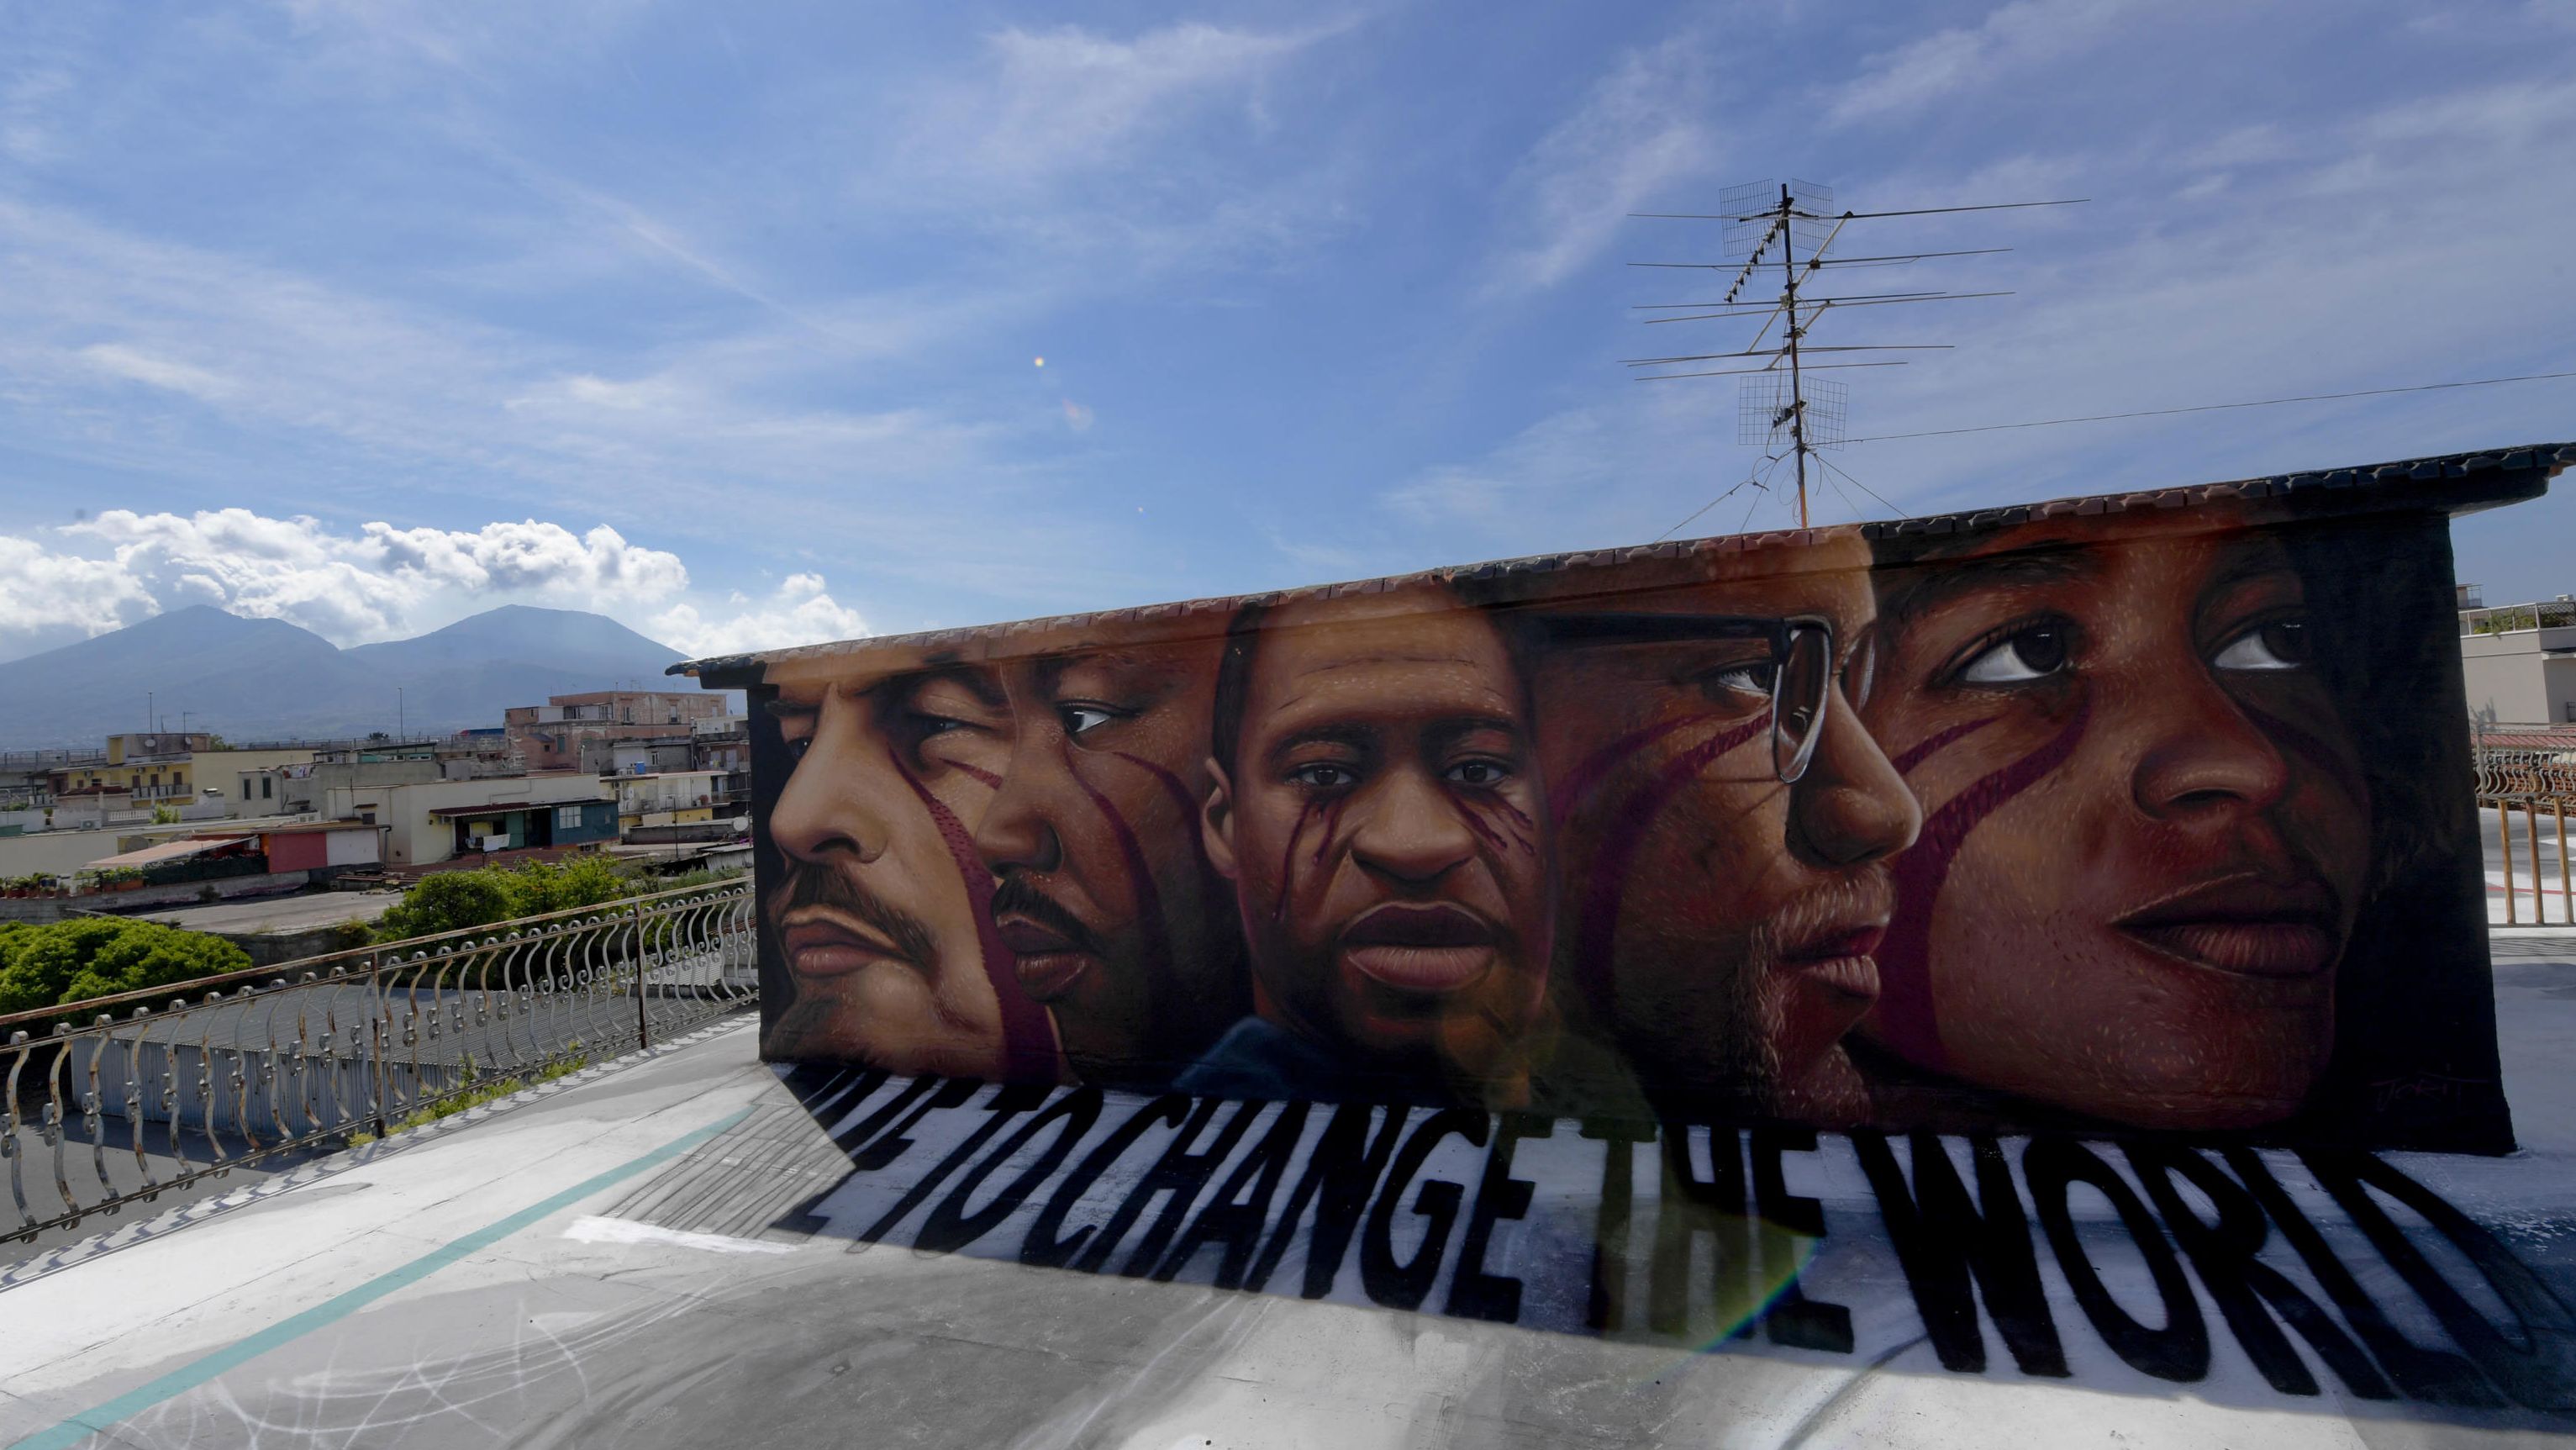 Floyd is seen at the center of this mural painted by street artist Jorit Agoch in Naples, Italy. The faces, from left, are Vladimir Lenin, Martin Luther King Jr., Floyd, Malcolm X and Angela Davis.